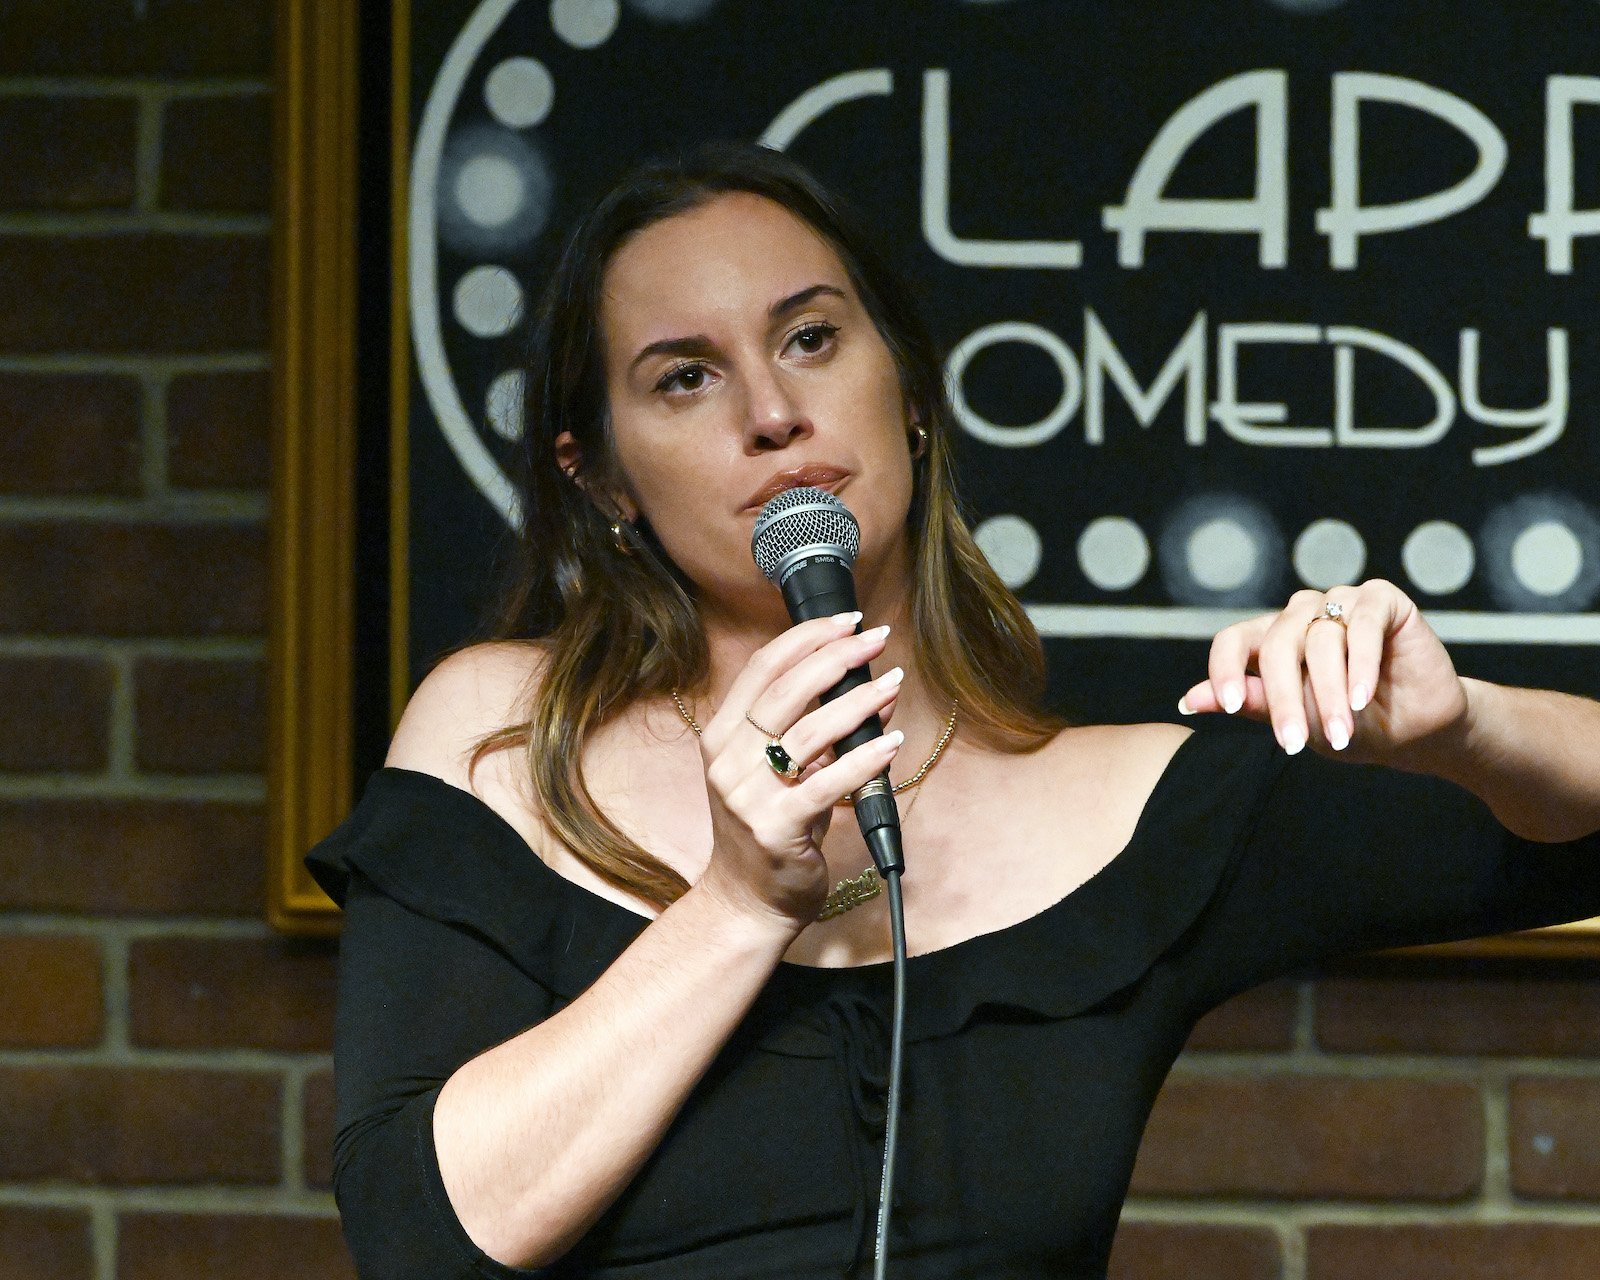 Hannah Berner from 'Summer House' performed at a comedy club 